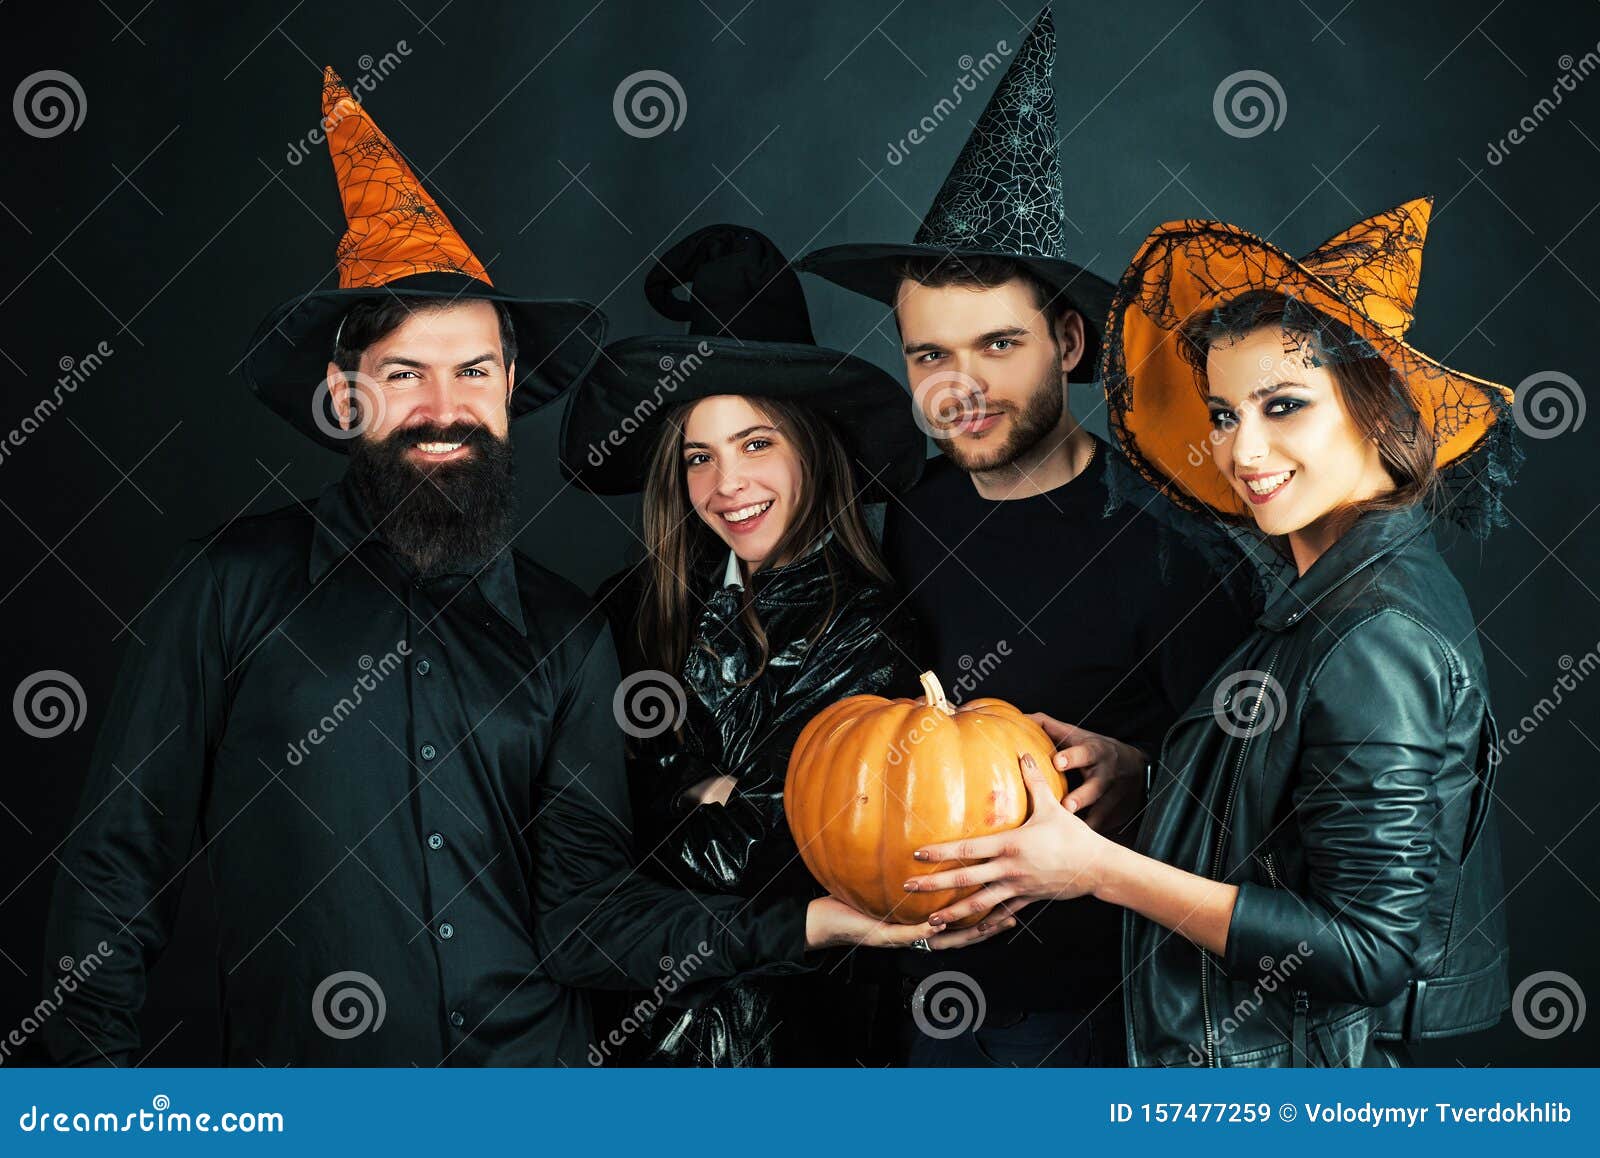 Best Friends Celebrated Halloween. Halloween Poster or Greeting Card ...